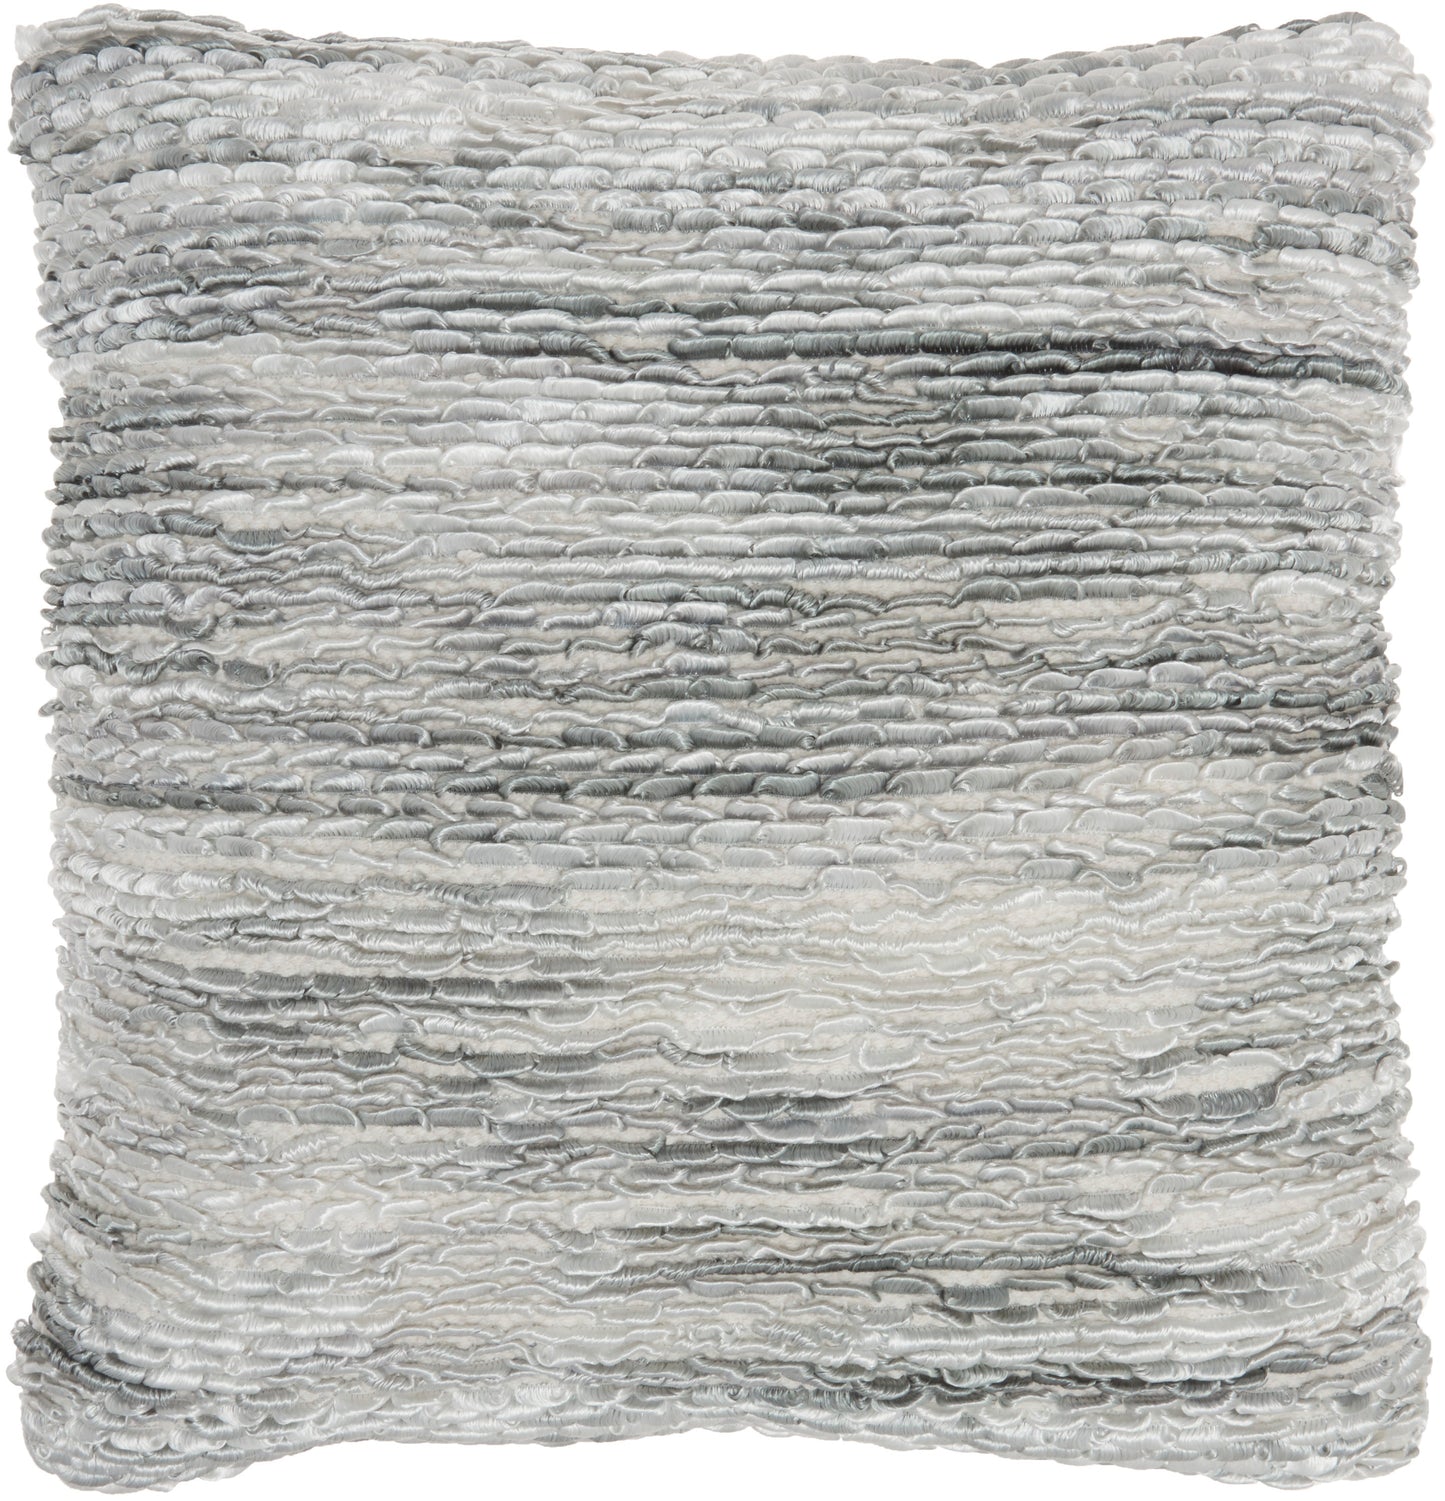 Life Styles DC257 Synthetic Blend Woven Ribbon Loops Throw Pillow From Mina Victory By Nourison Rugs